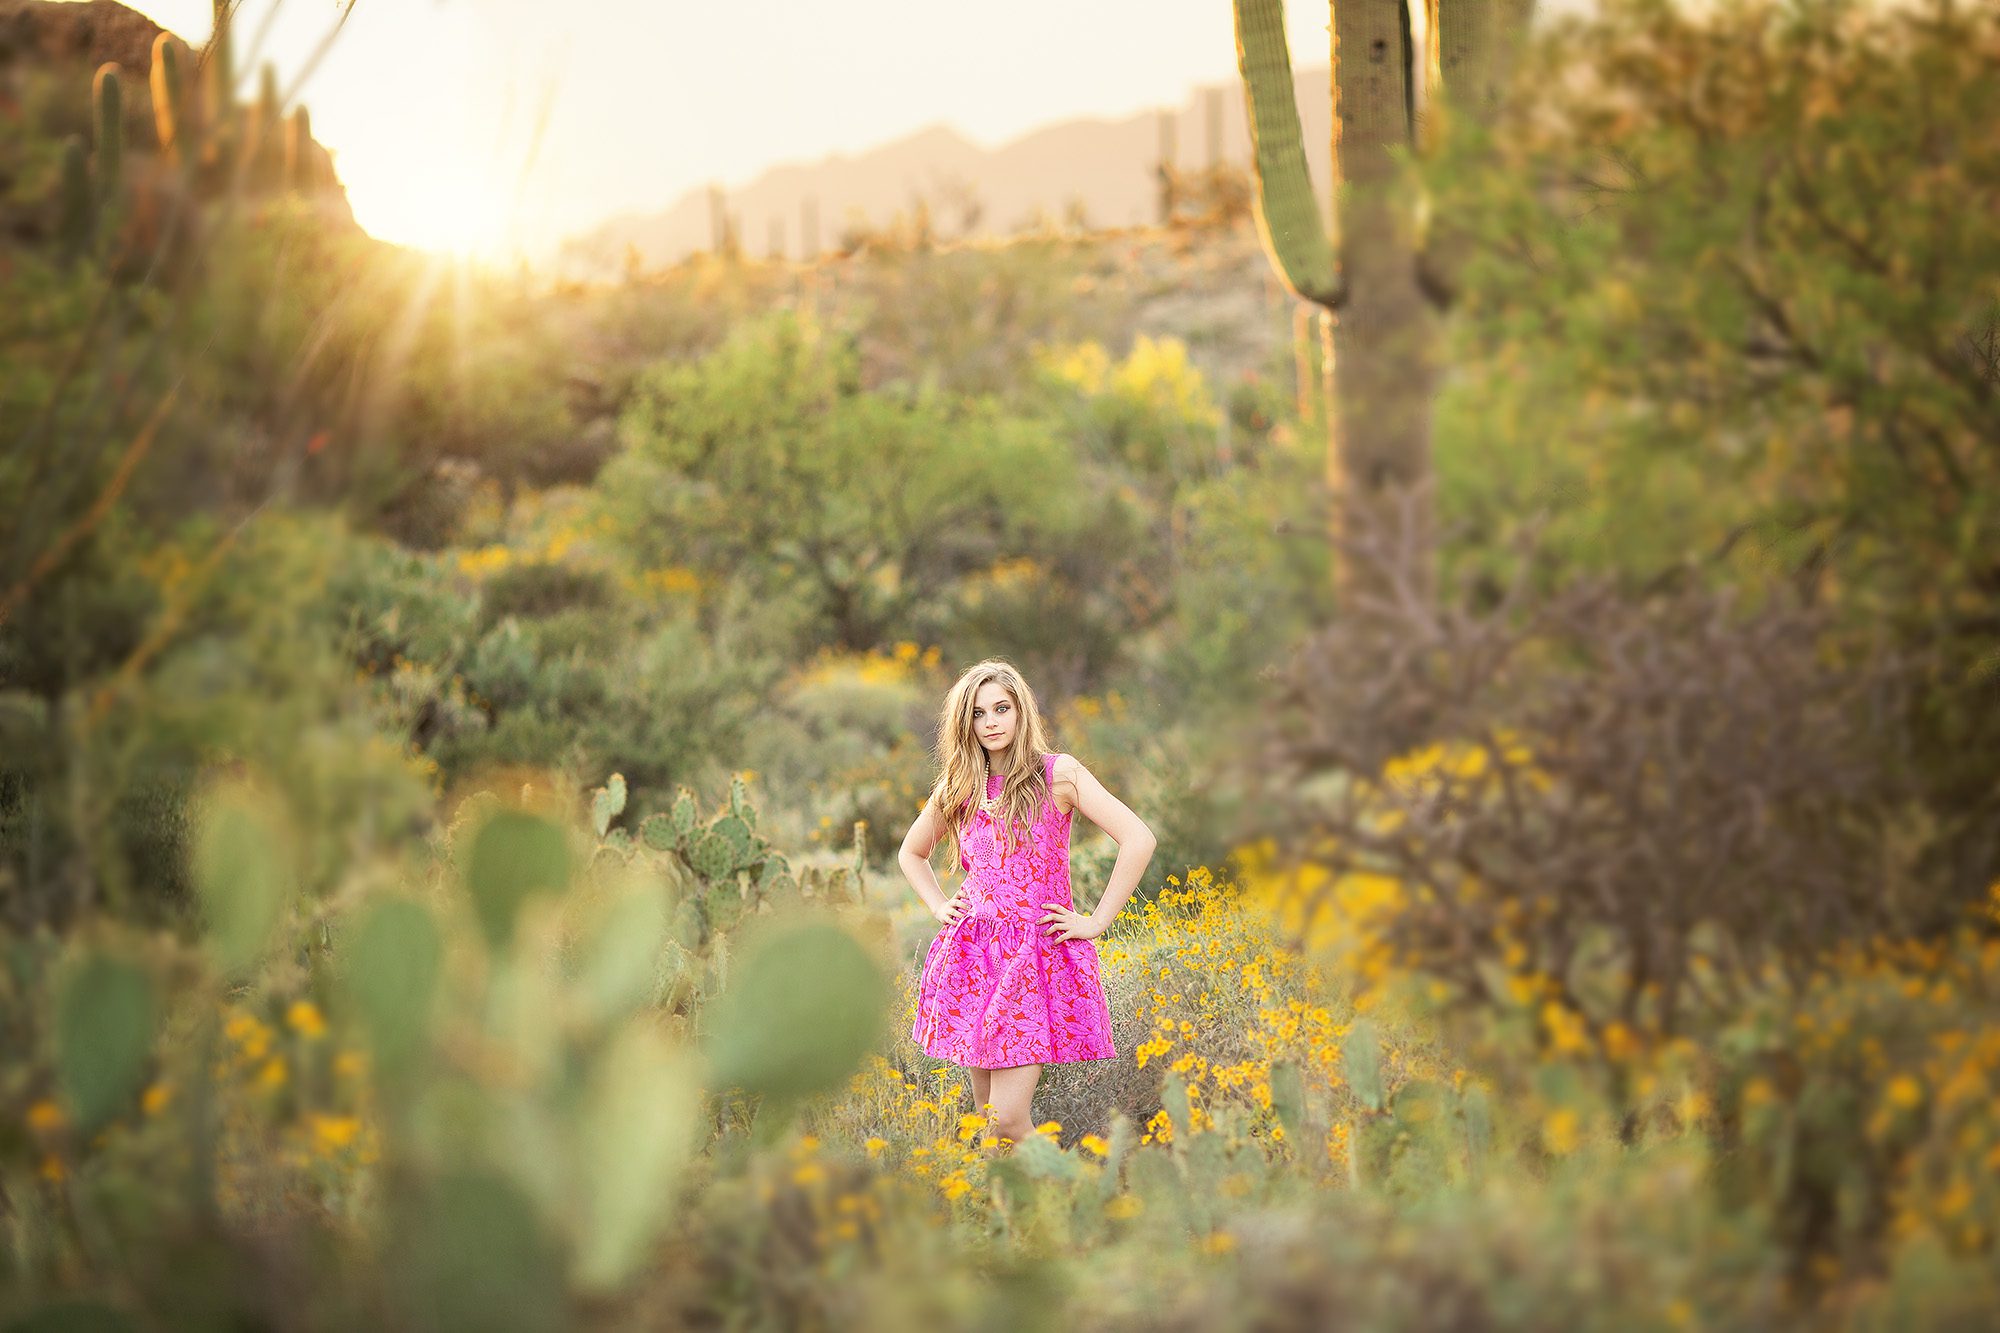 Teenage girl wearing a colorful pink dress and pearls during her photo session at Saguaro National Park East, posed amongst saguaros and desert flowers with the Santa Catalina Mountains as a backdrop.